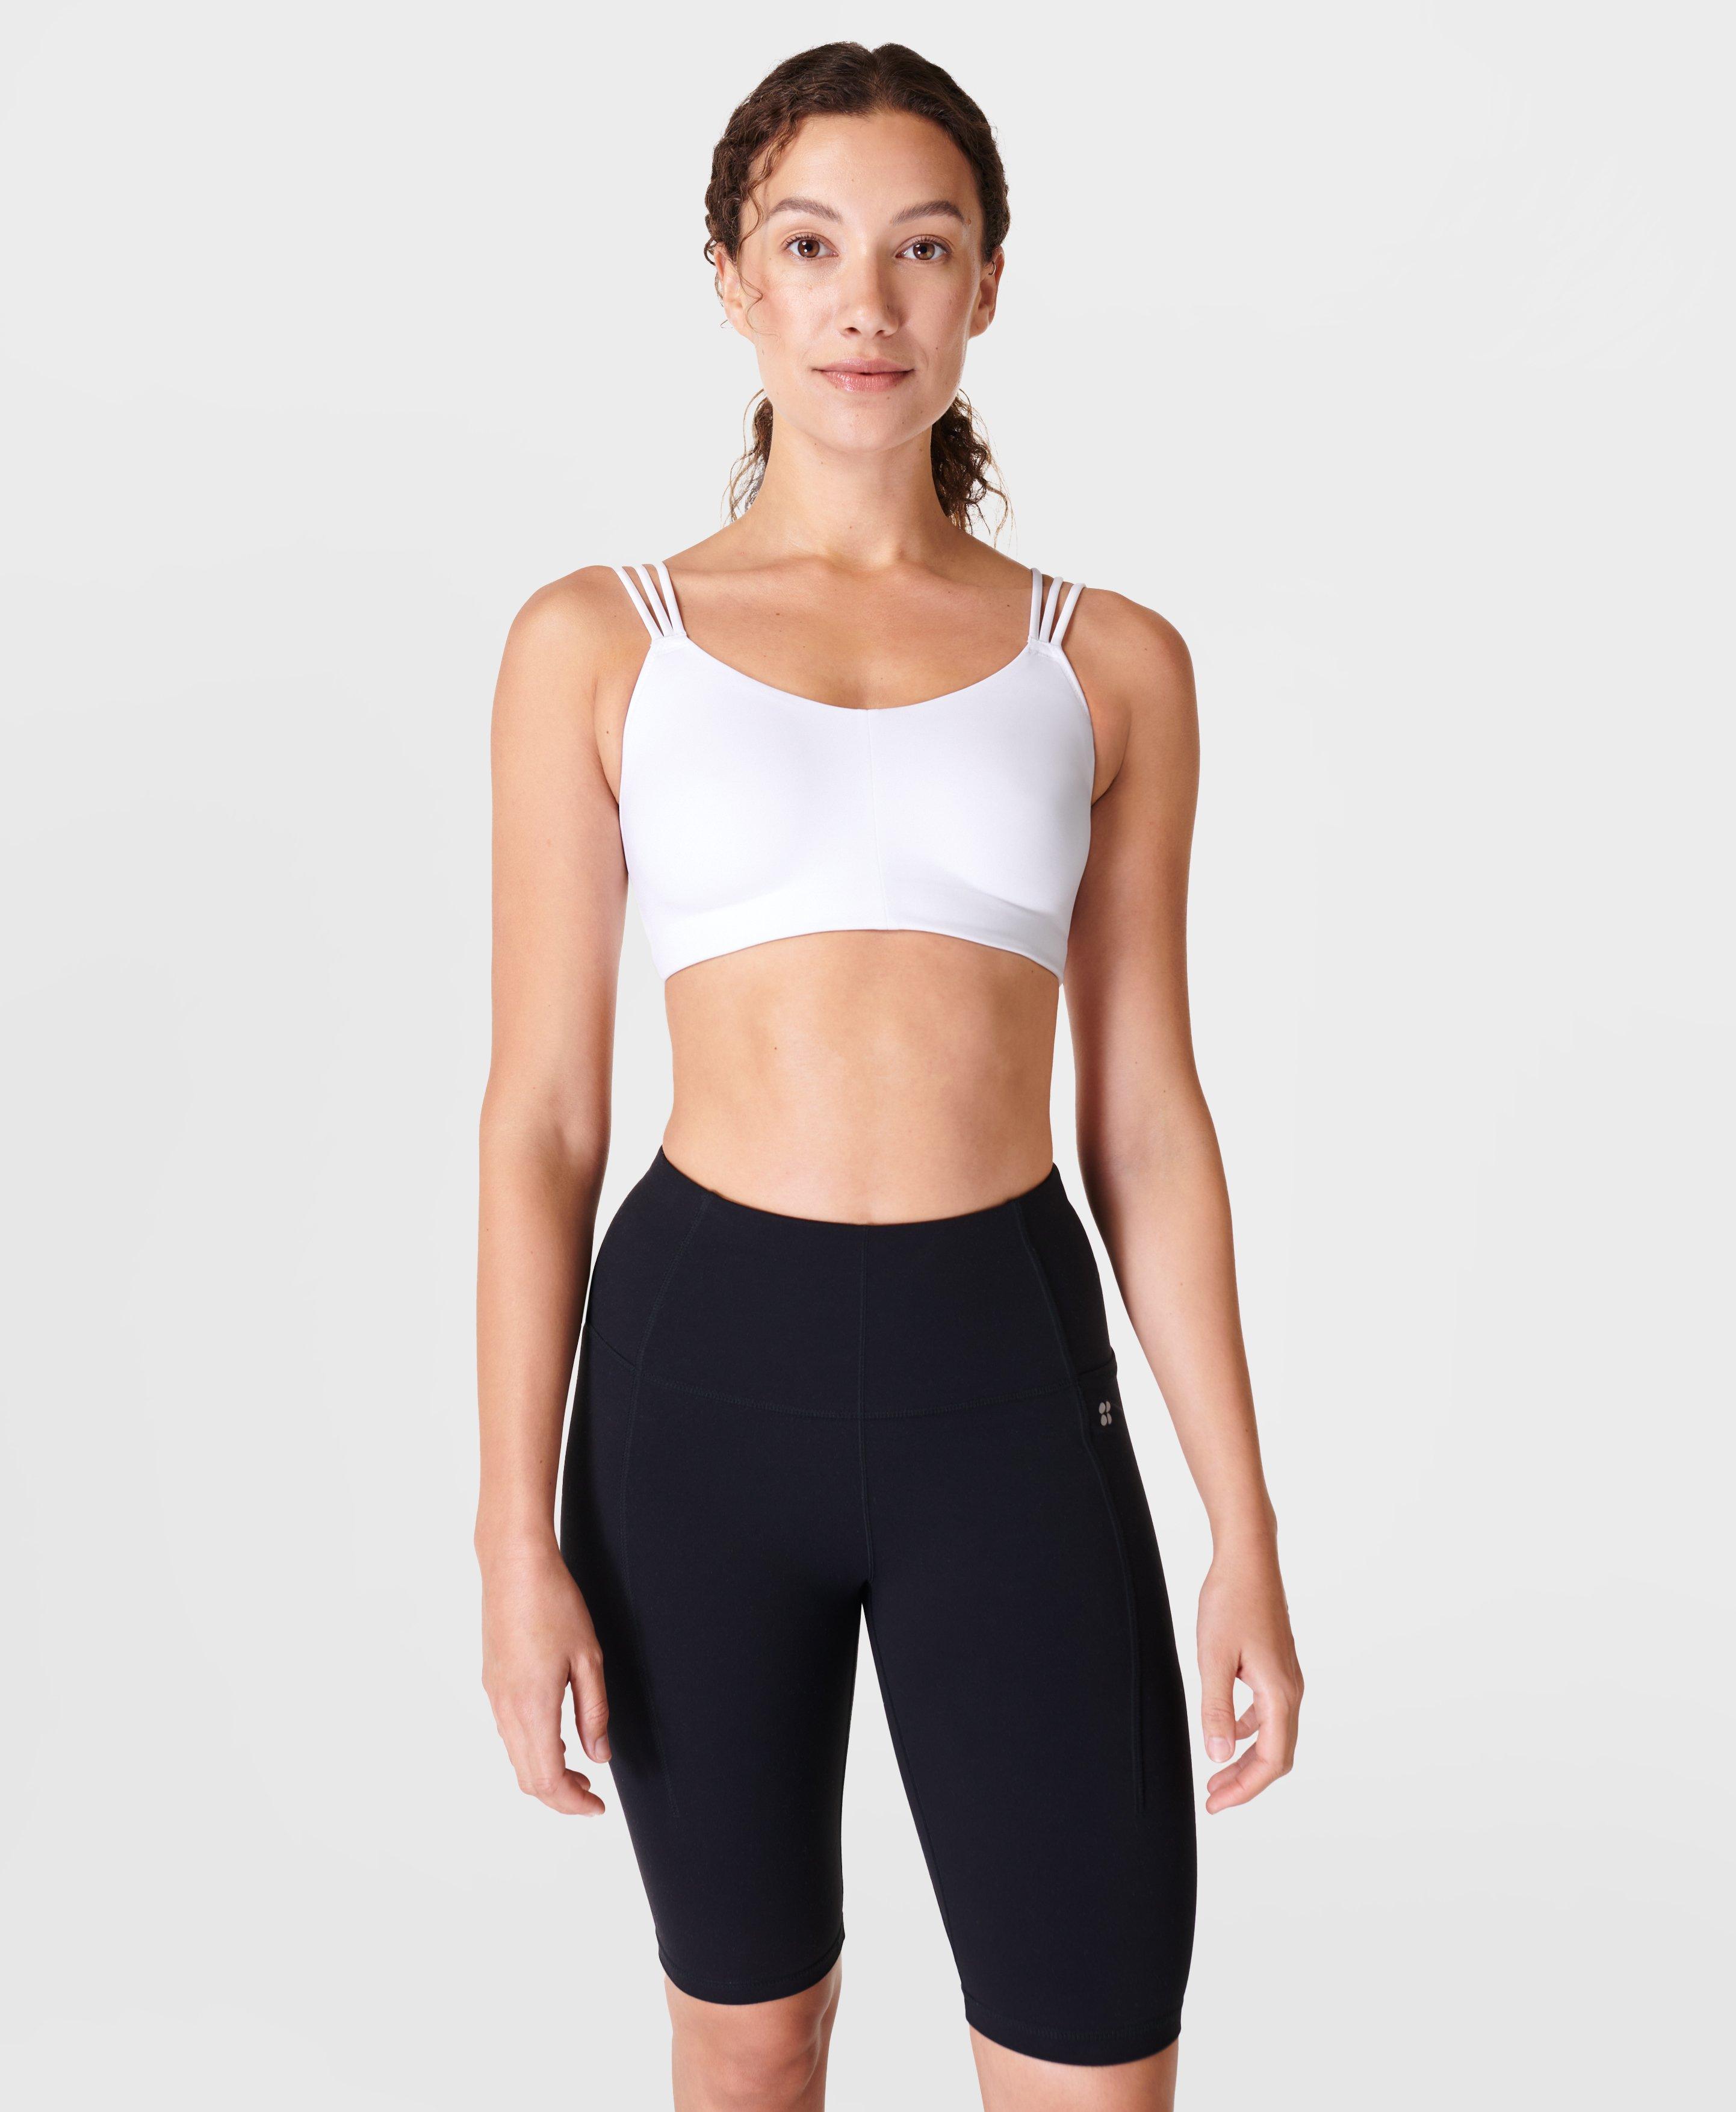 Large Back Style Gathering Running Sports Bra Without Steel Ring Moisture  Absorbing Fitness Yoga X0822 From Vip_official_001, $9.82